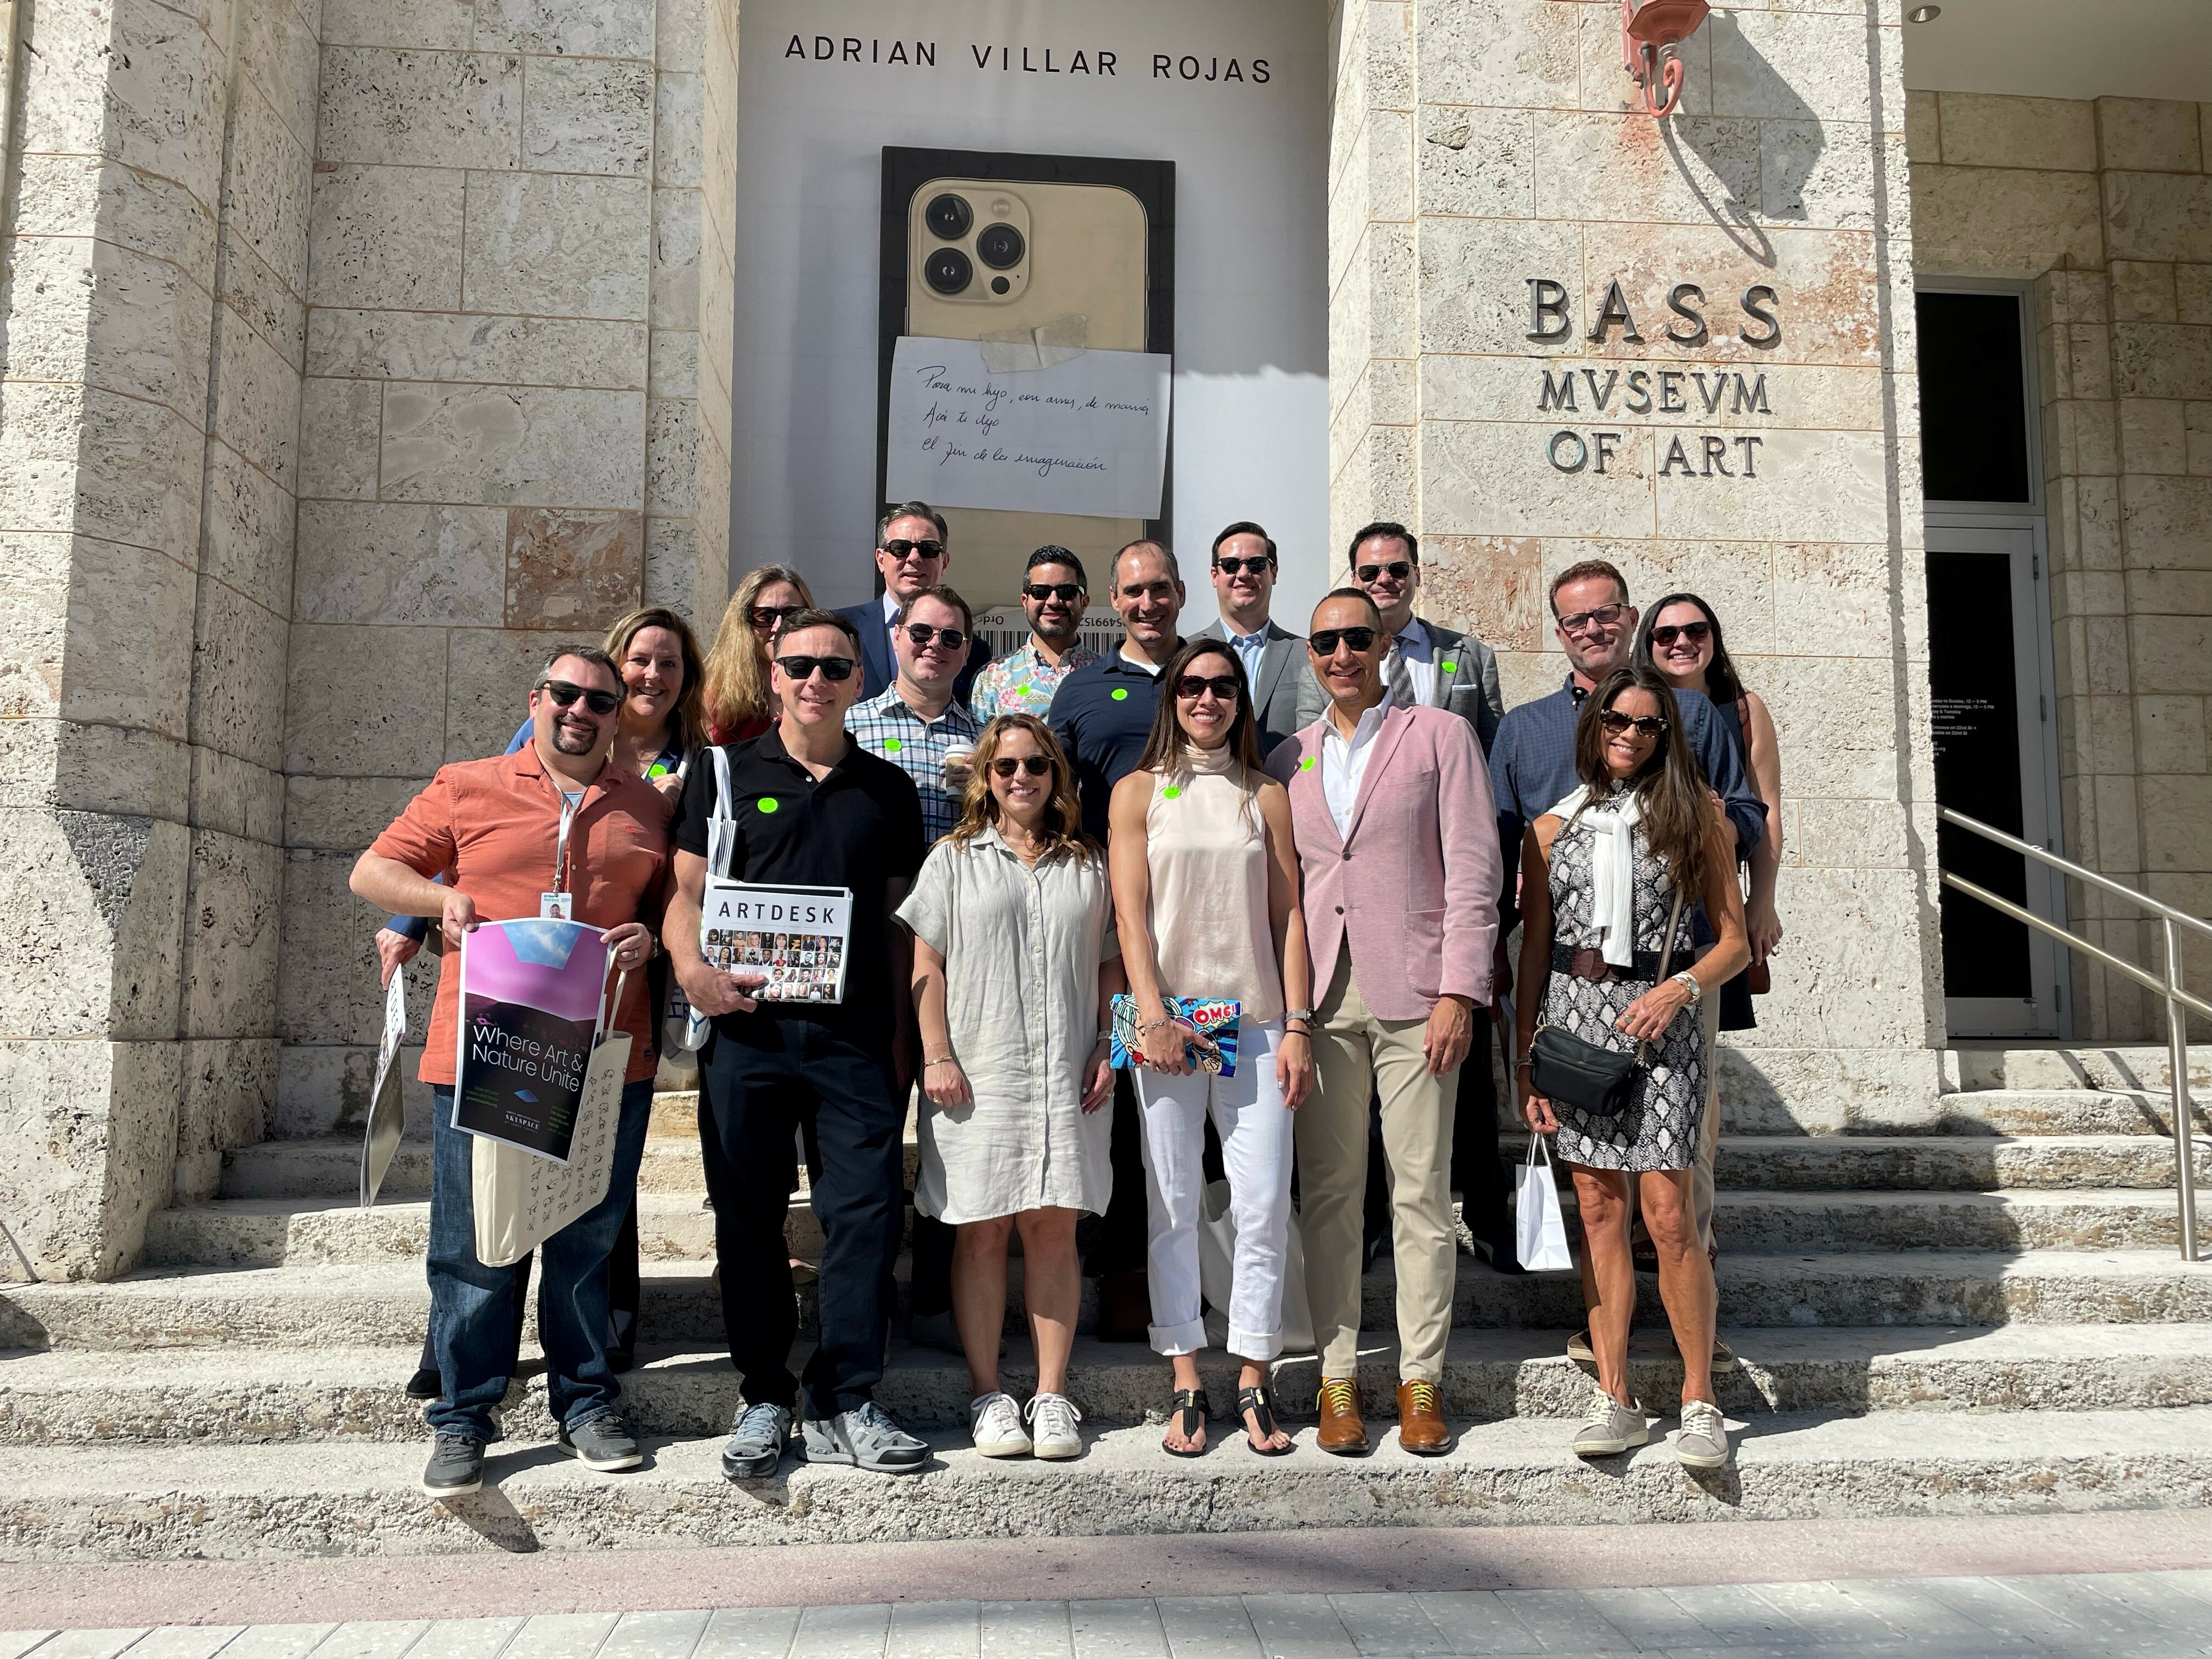 A group of people, many wearing sunglasses, stand on light-colored stone steps in front of a matching building labeled "Bass Museum of Art"